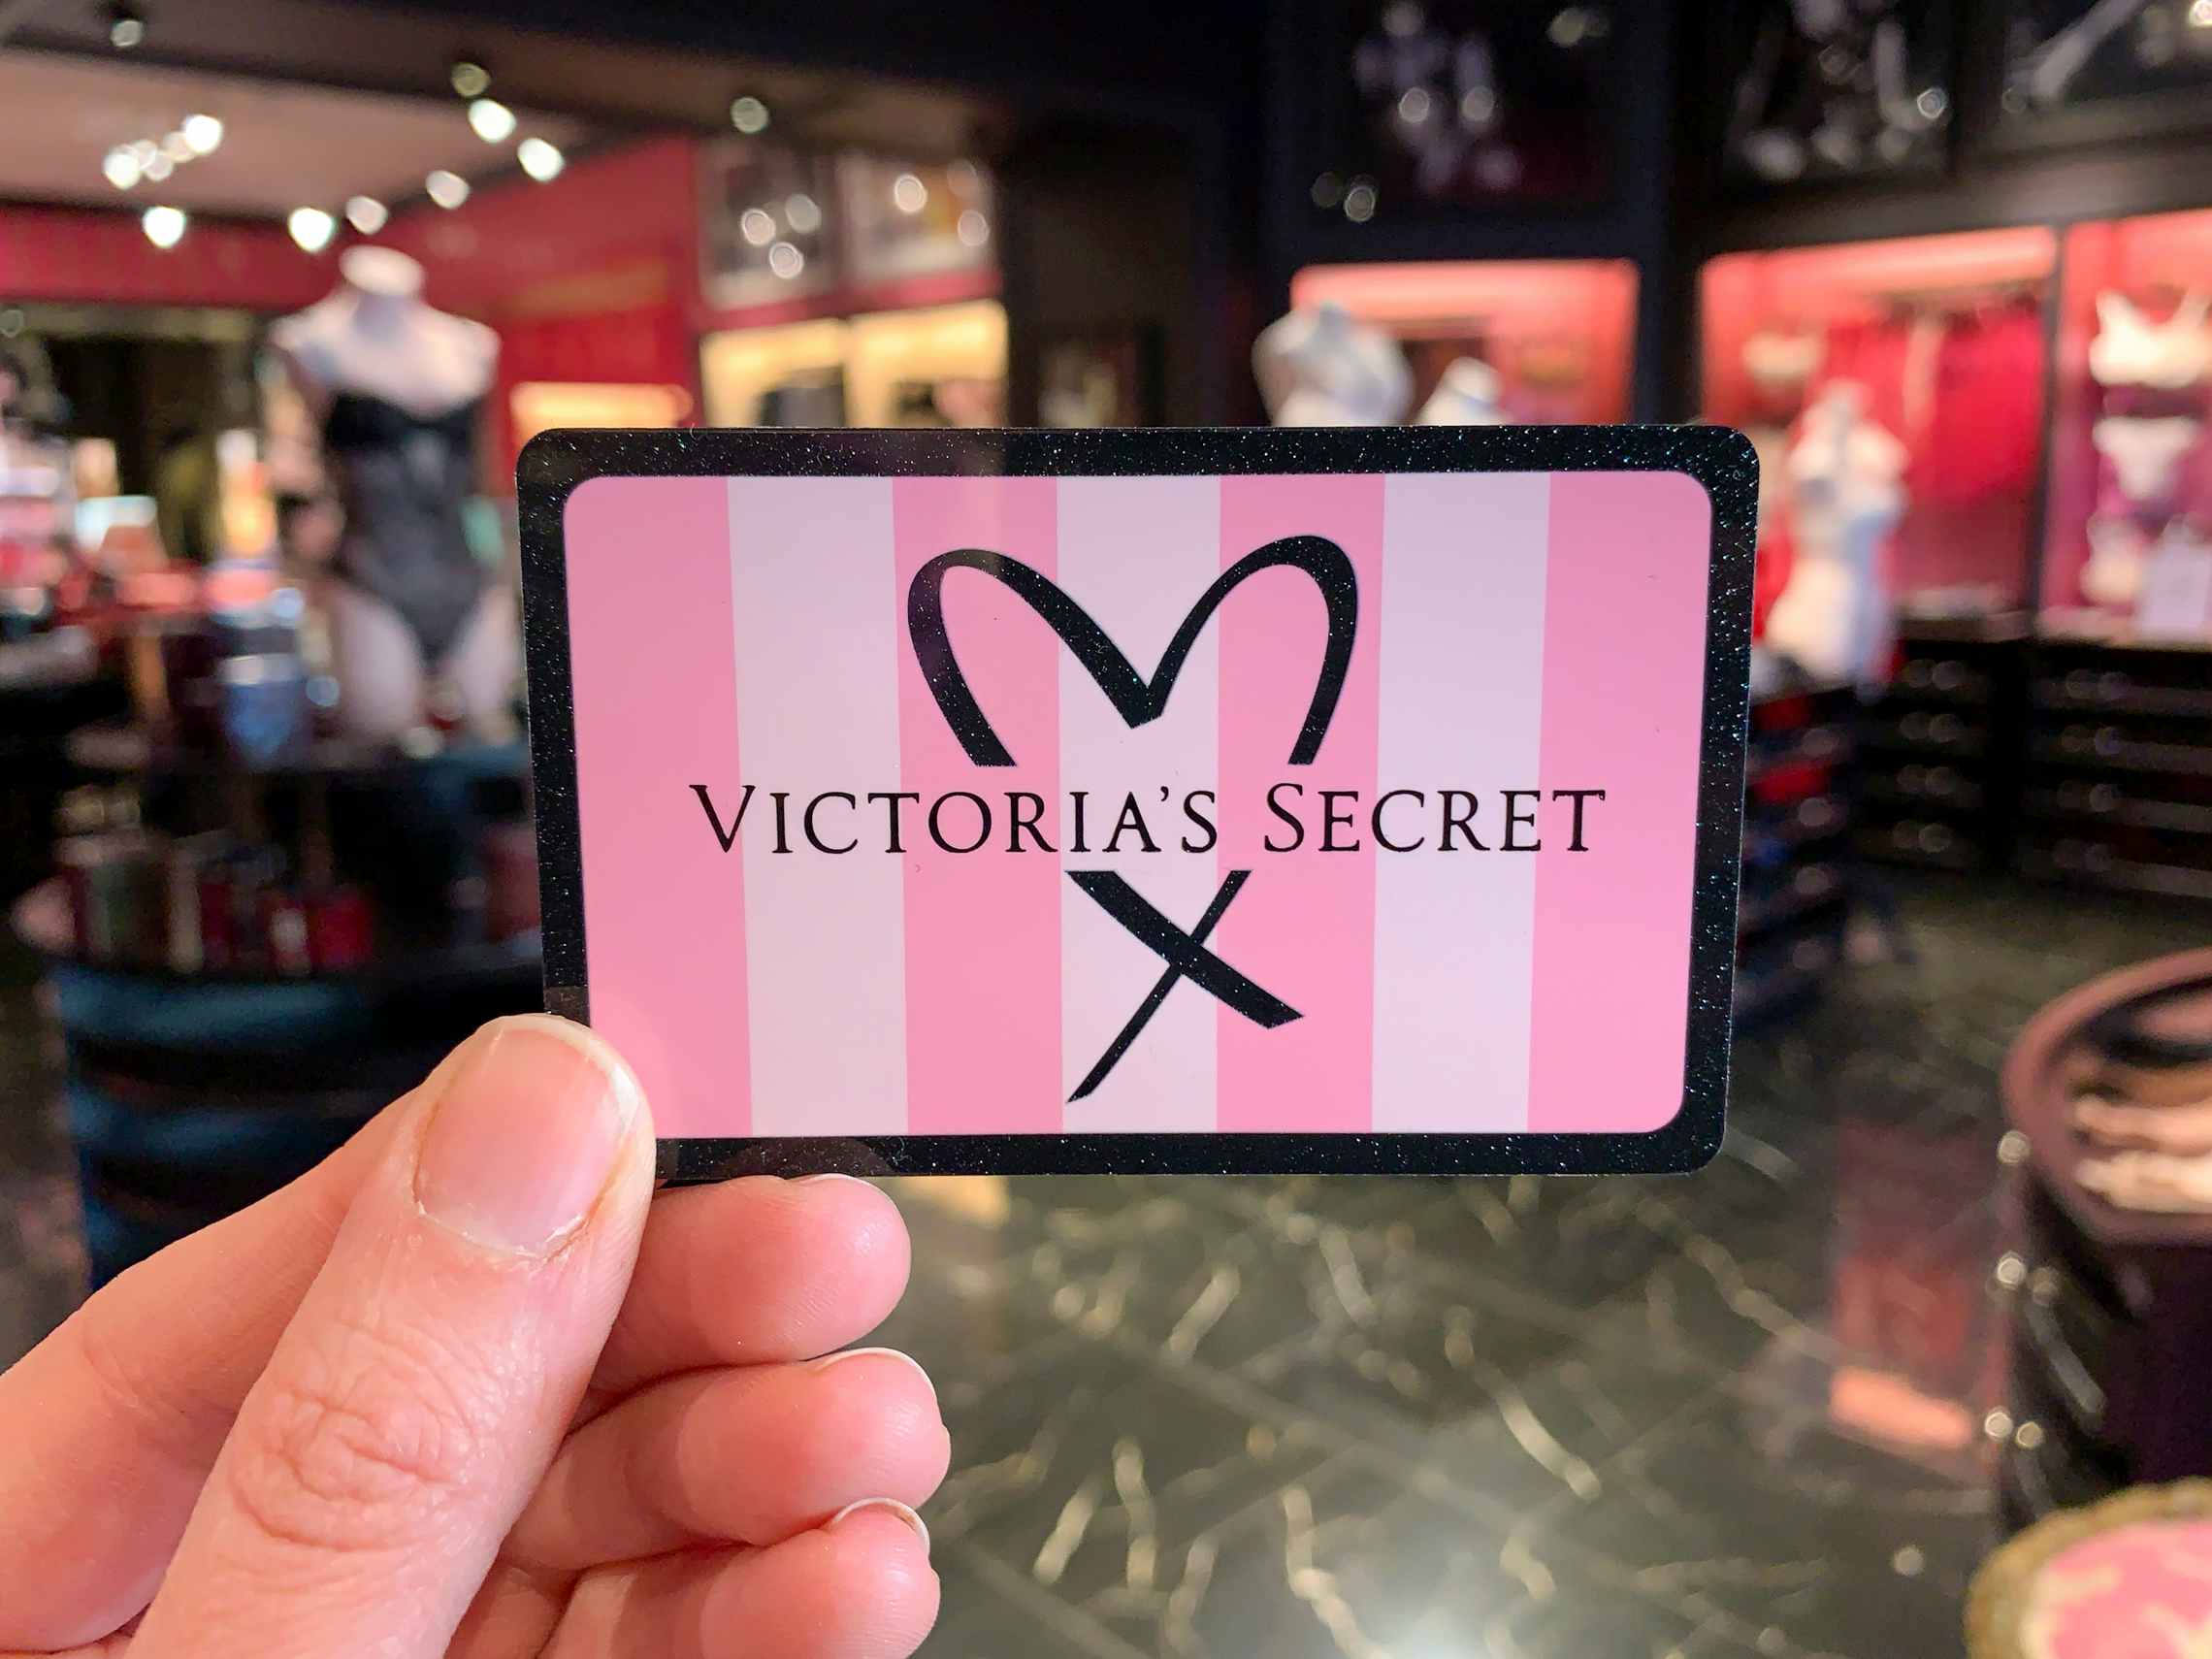 Victoria's Secret - Black Friday heaven awaits! Some of our stores